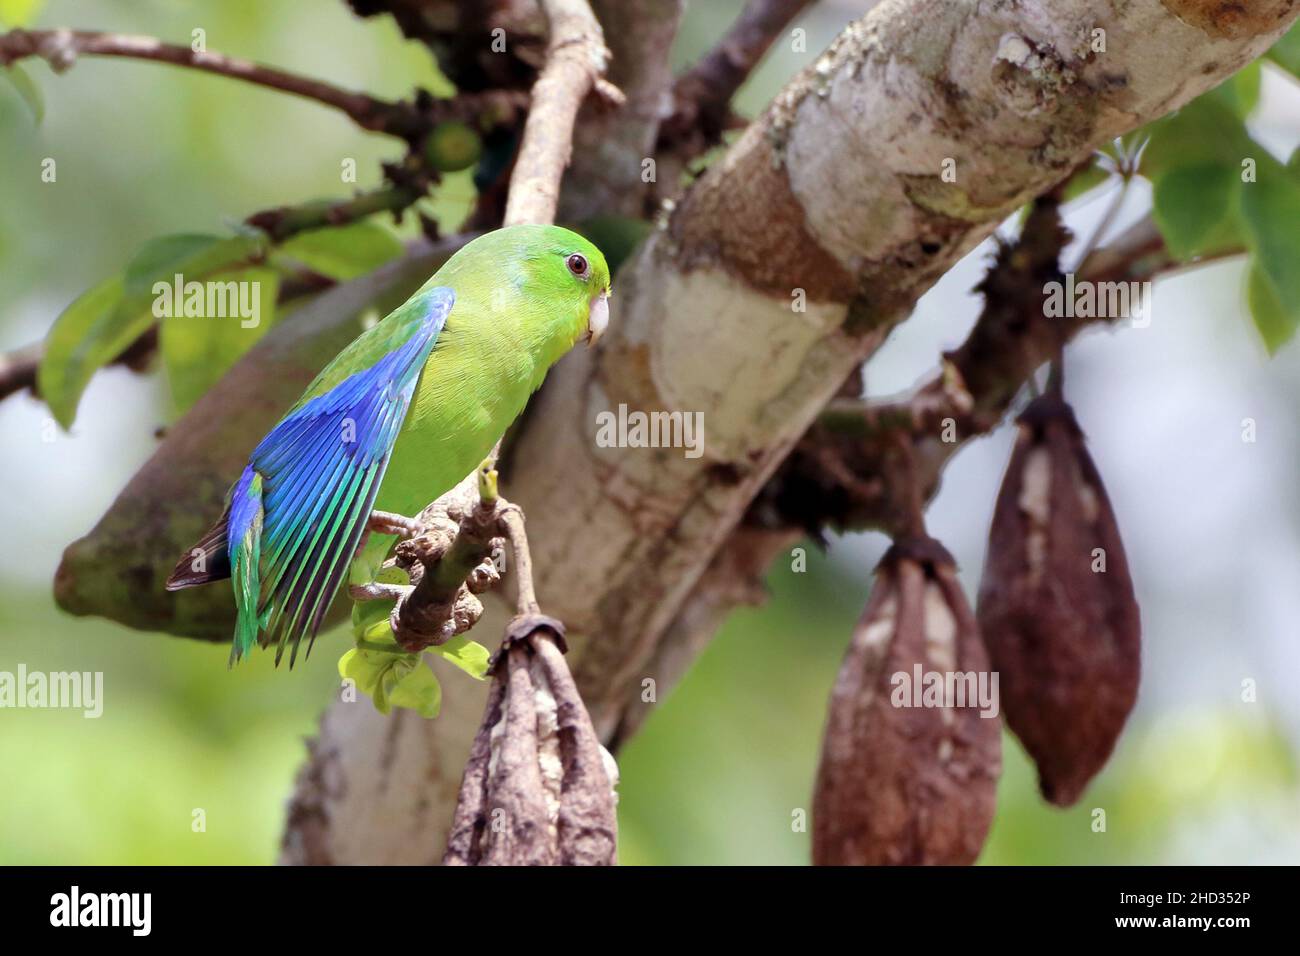 male Blue-winged Parrotlet (Forpus xanthopterygius) showing blue wing detail Stock Photo